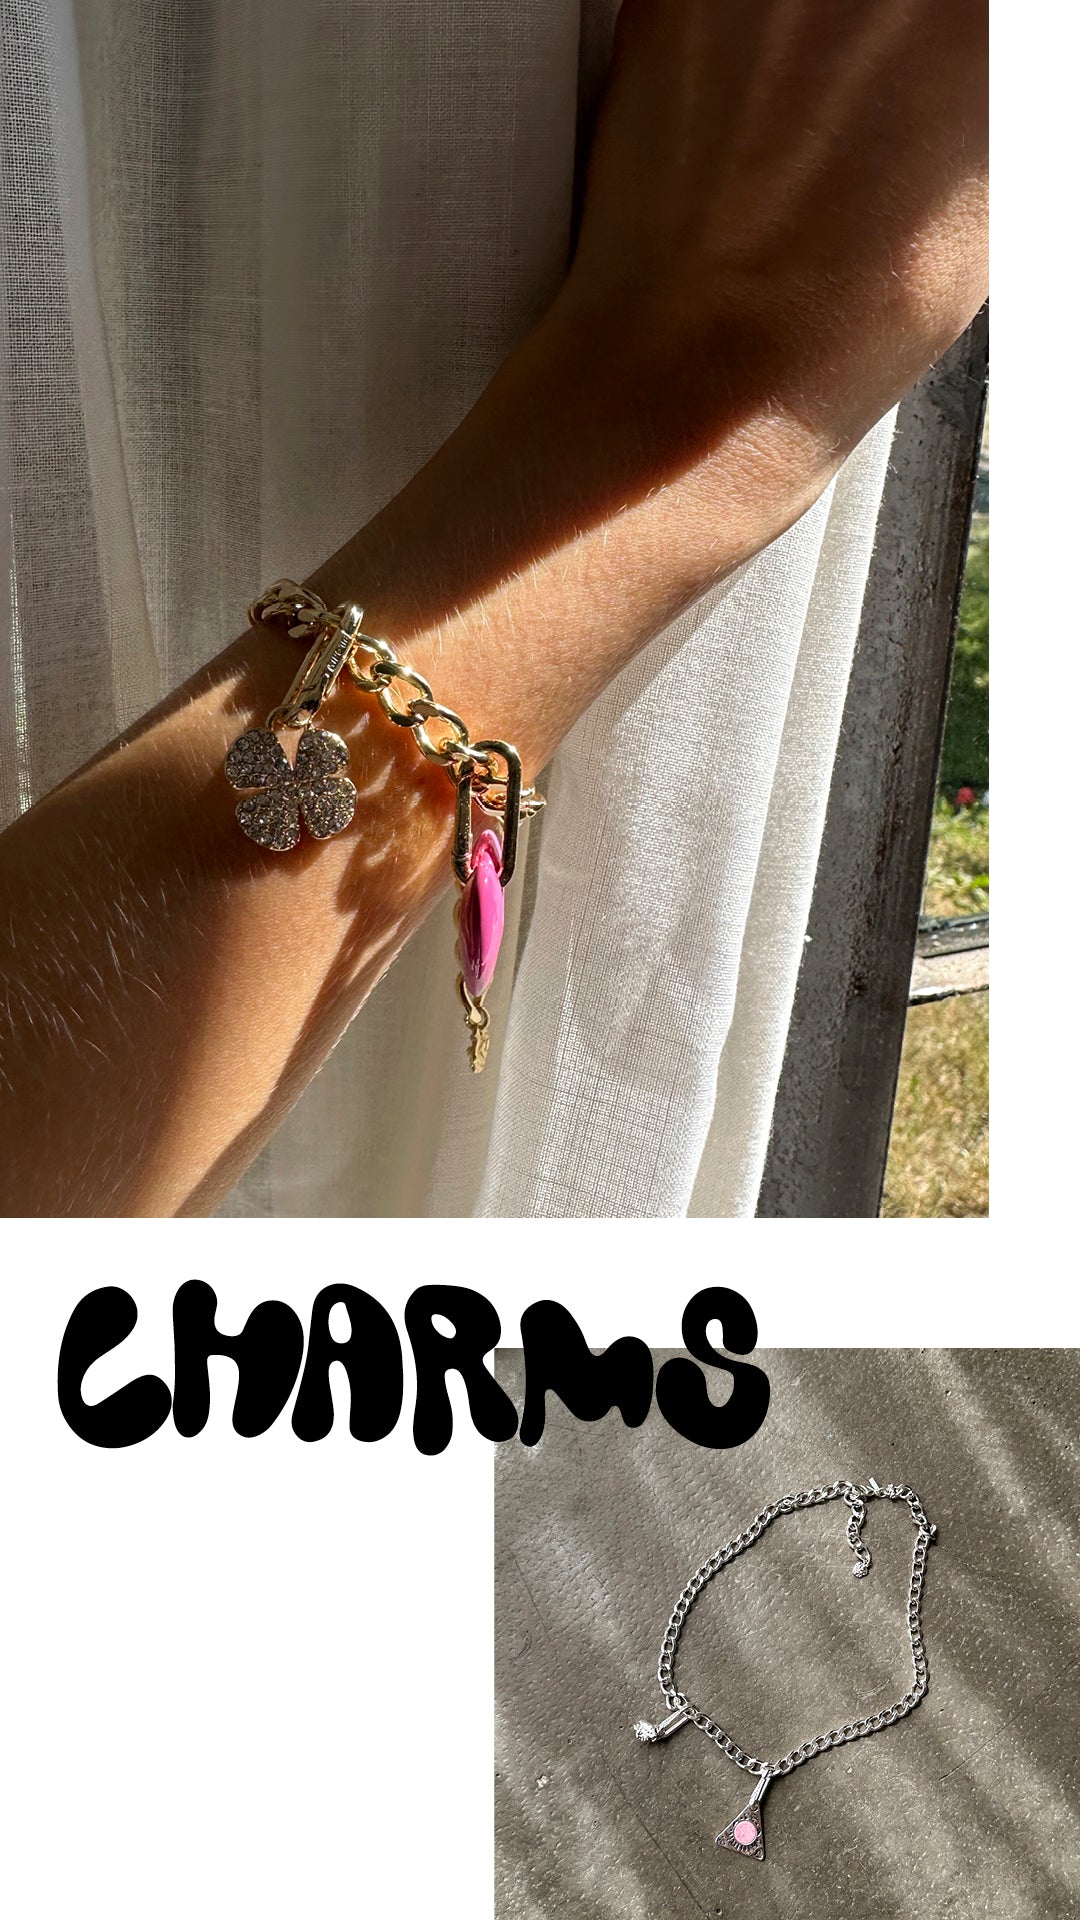 The Charms Capsule